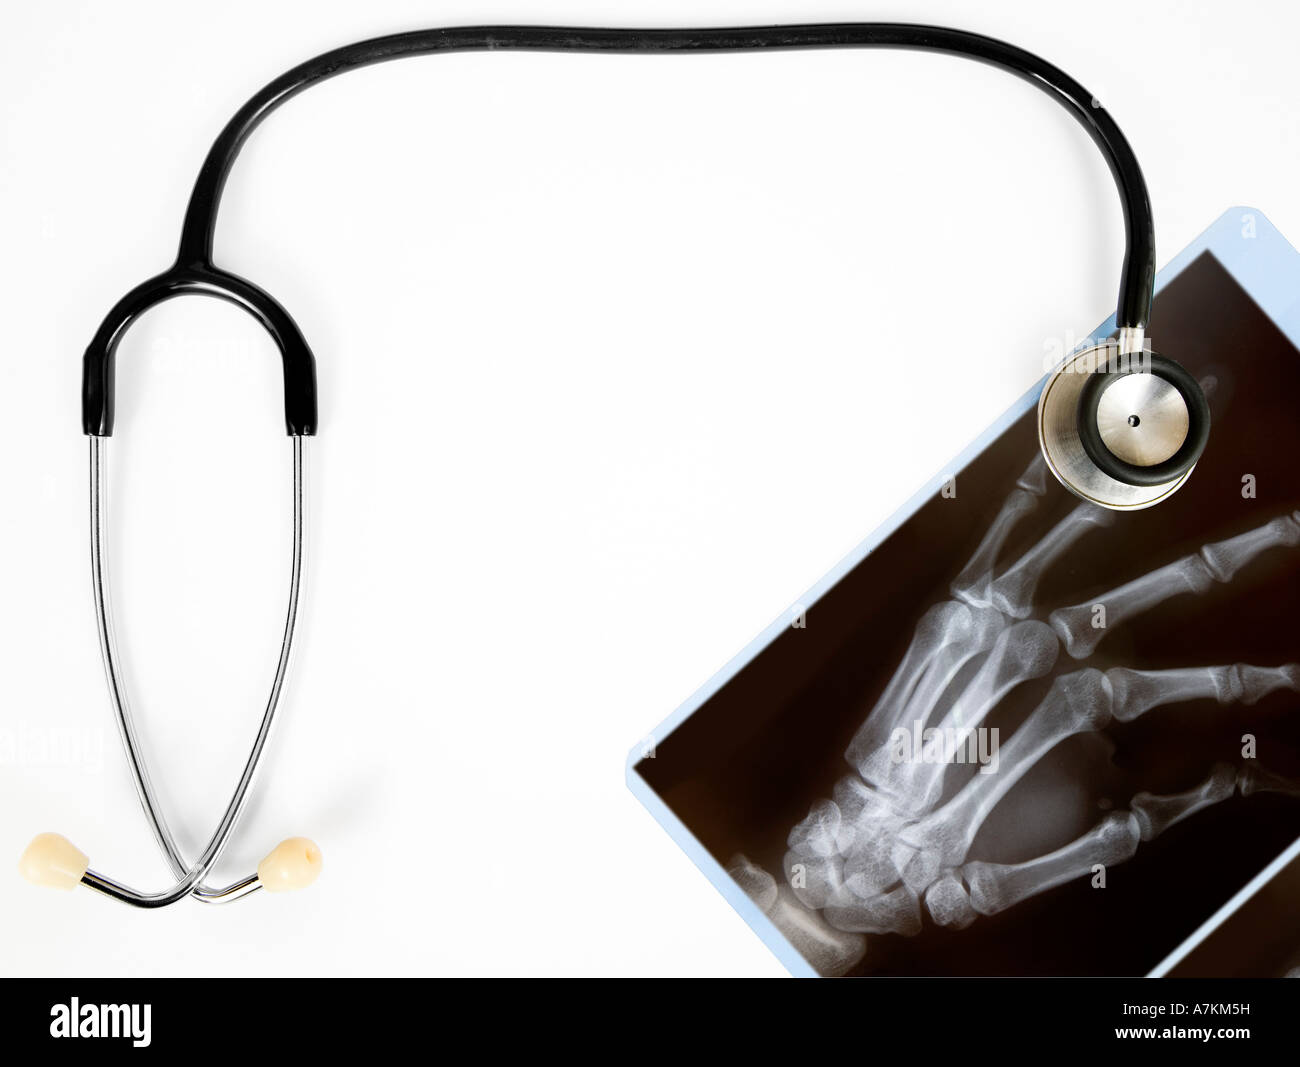 An x-ray of a hand with a stethoscope isolated on white Stock Photo